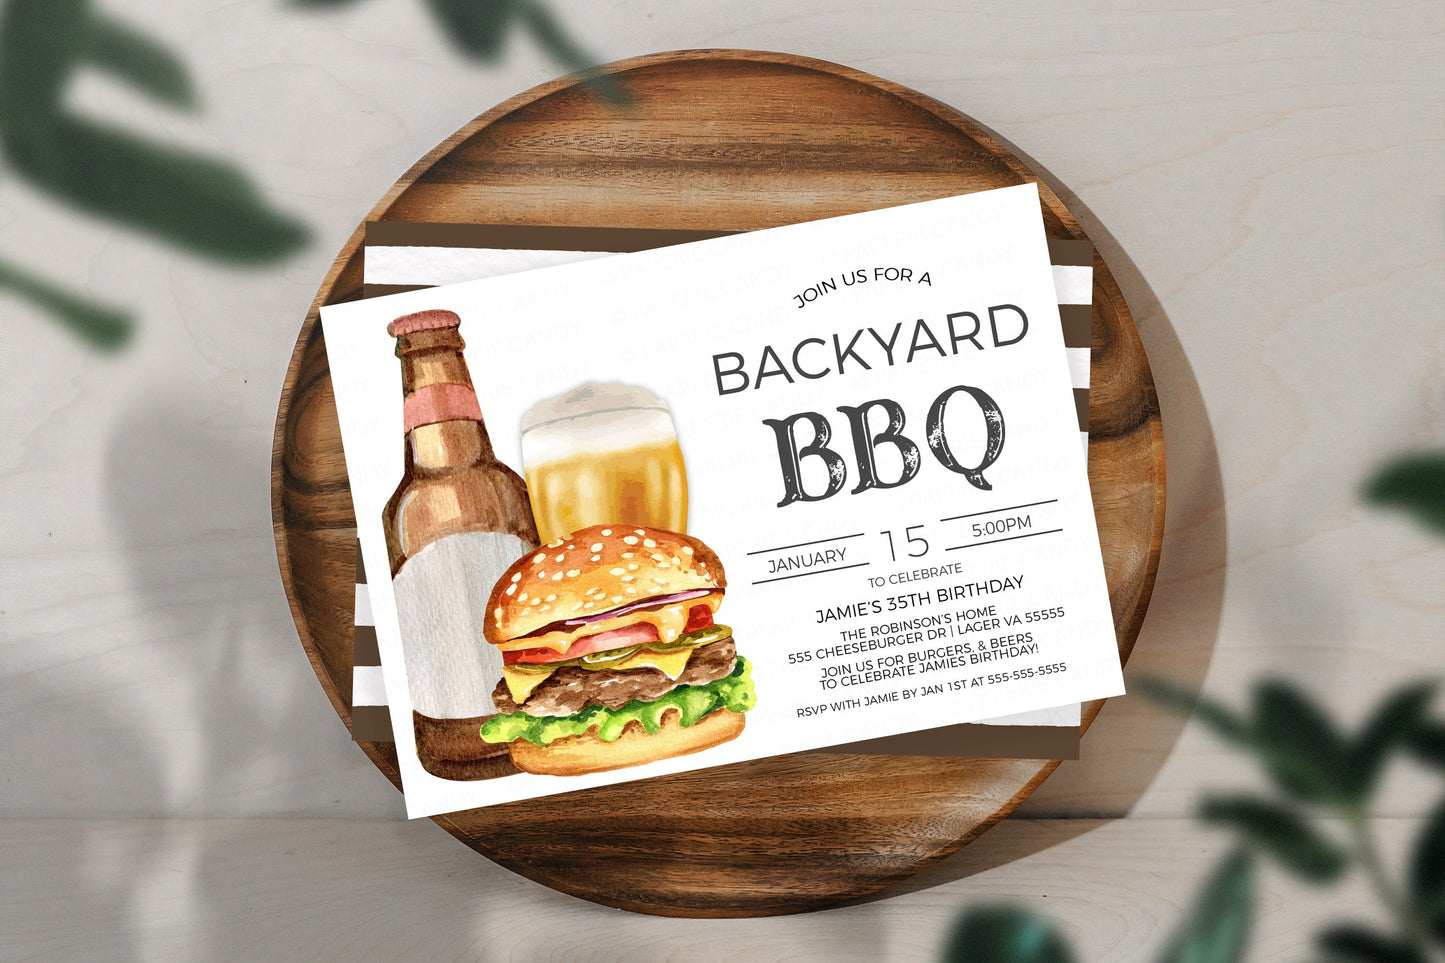 Backyard BBQ Invitation, Barbeque Burgers Beer Invite, Grilling Cookout Barbecue Party, Spring Summer Shower Editable Printable Template